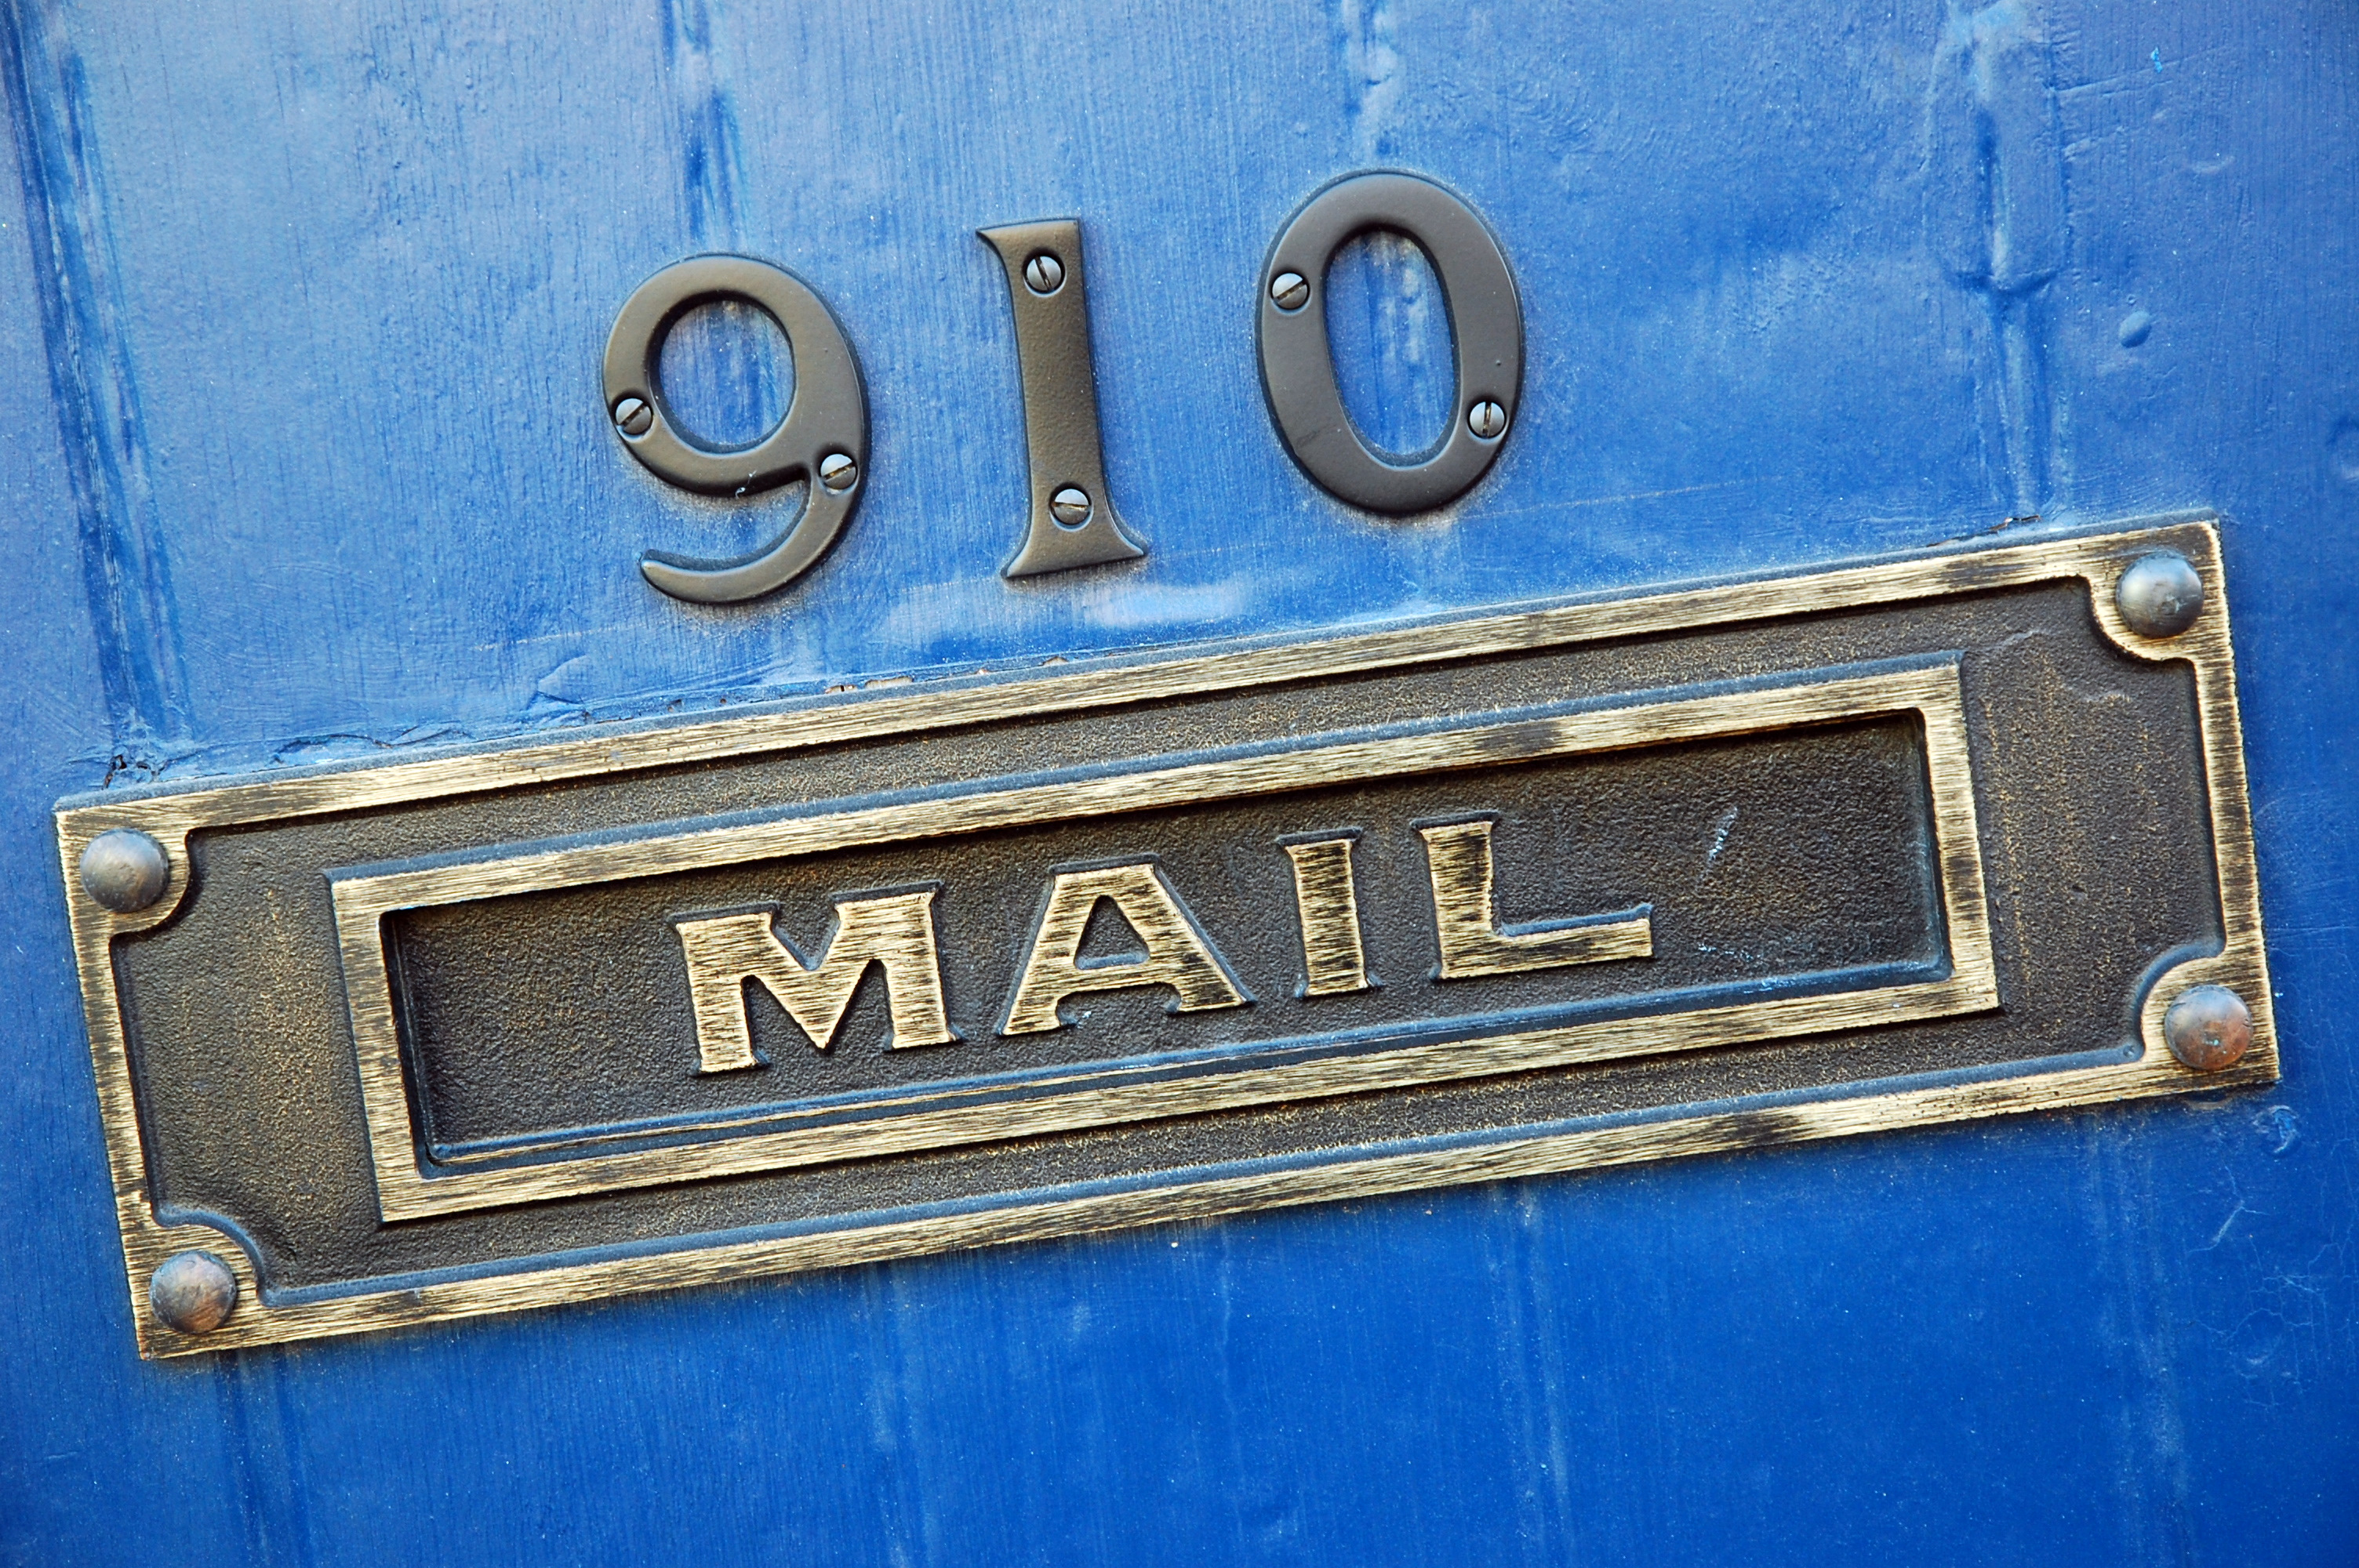 Close-up photograph of a brass mail slot in a door. The door is painted blue and above the mail slot are the numbers 910.